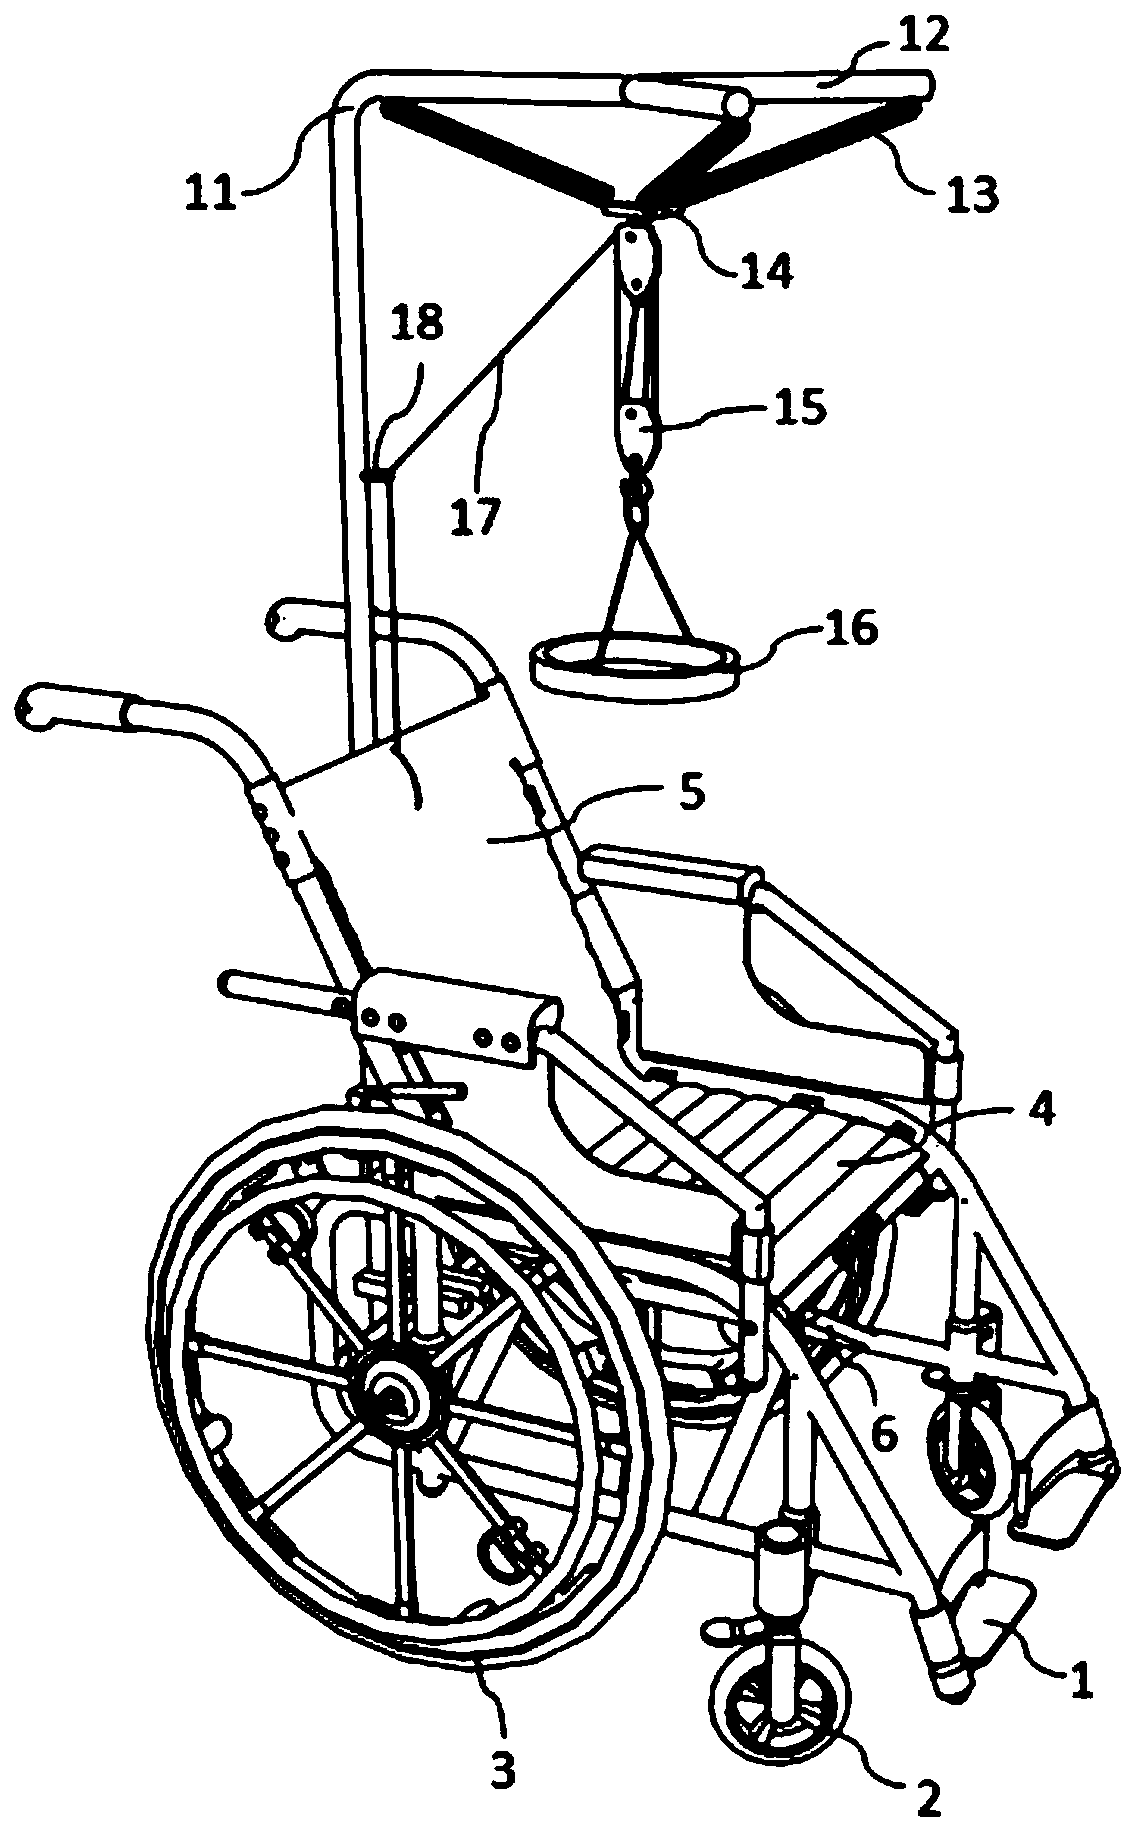 Novel scoliosis traction wheelchair